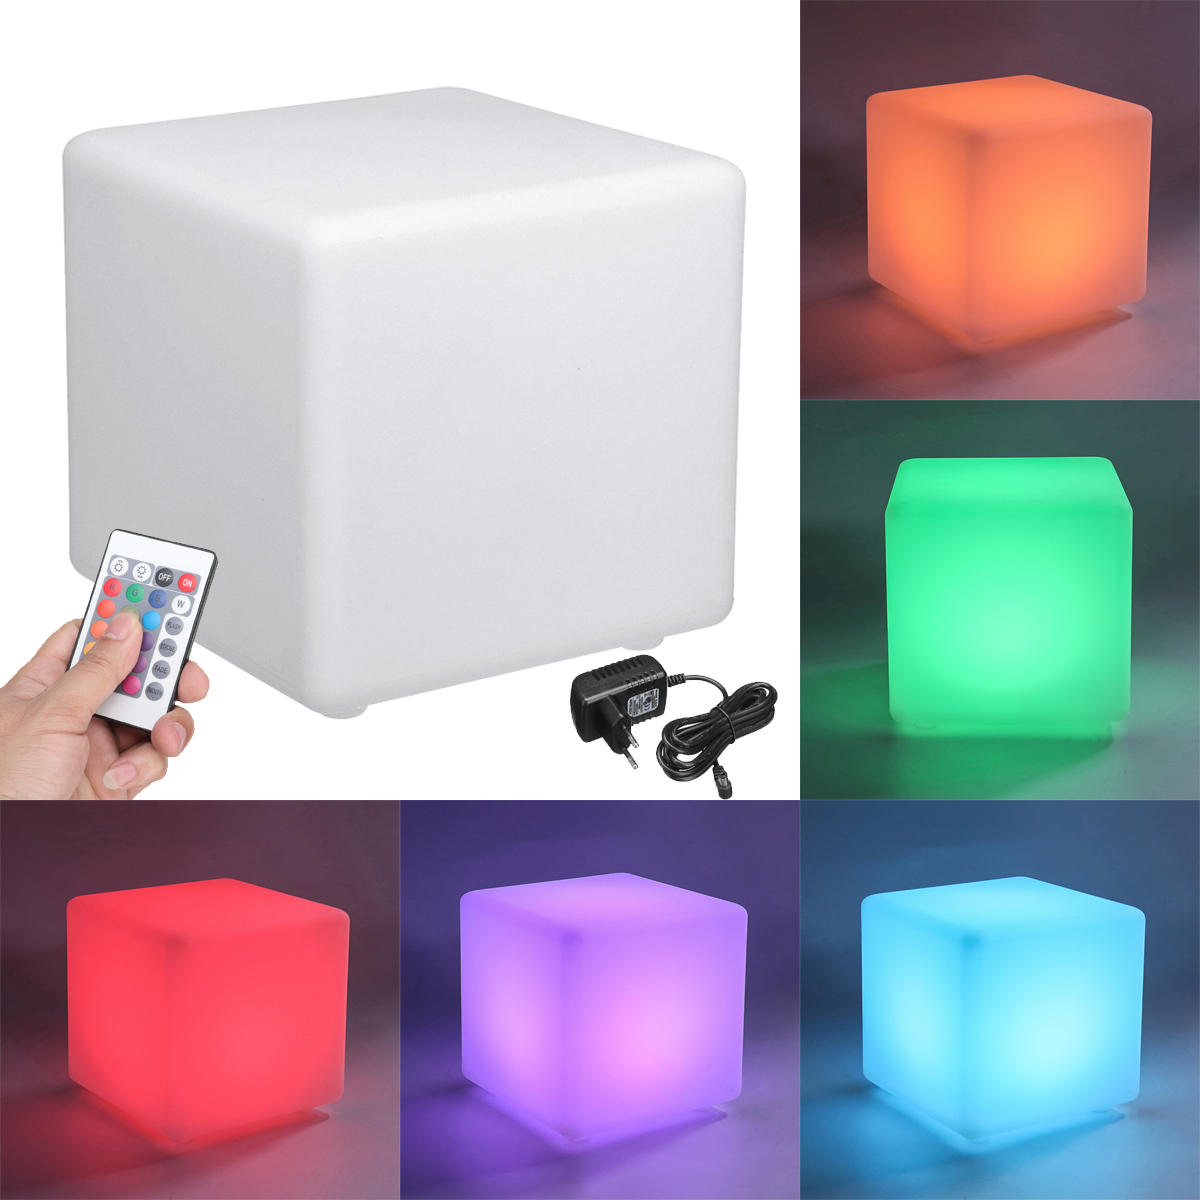 Cocktail Tables Chair Color Changing LED Clubbing Lighting Stool Night Stand 30cm x 30cm x 30cm